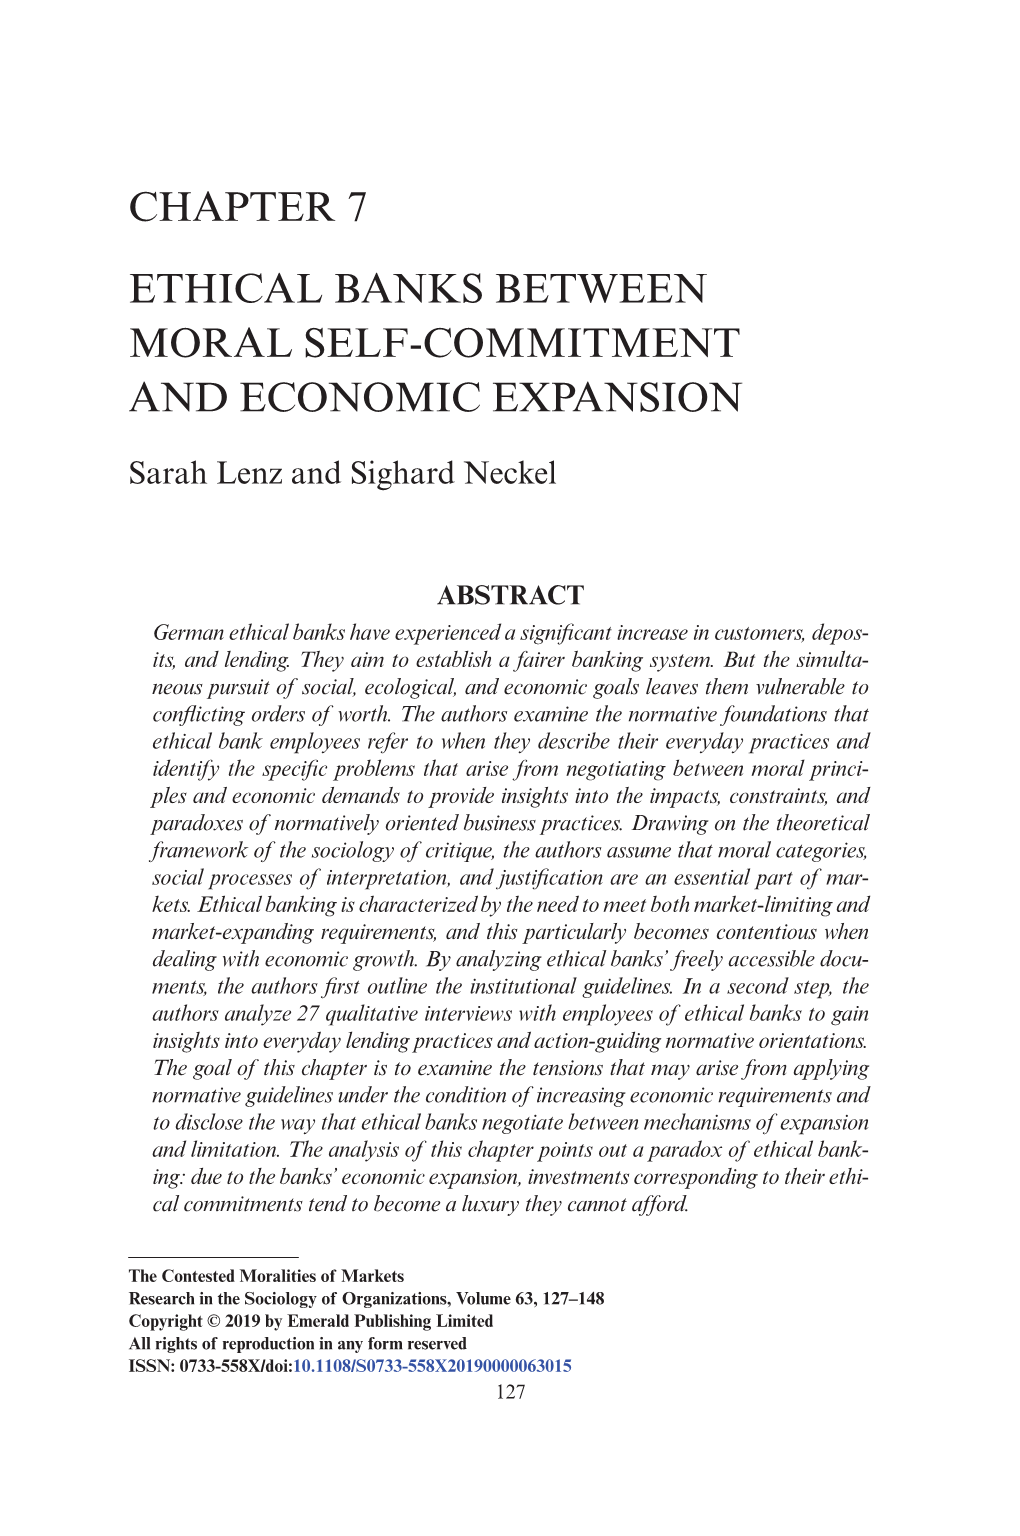 Ethical Banks Between Moral Self-Commitment and Economic Expansion